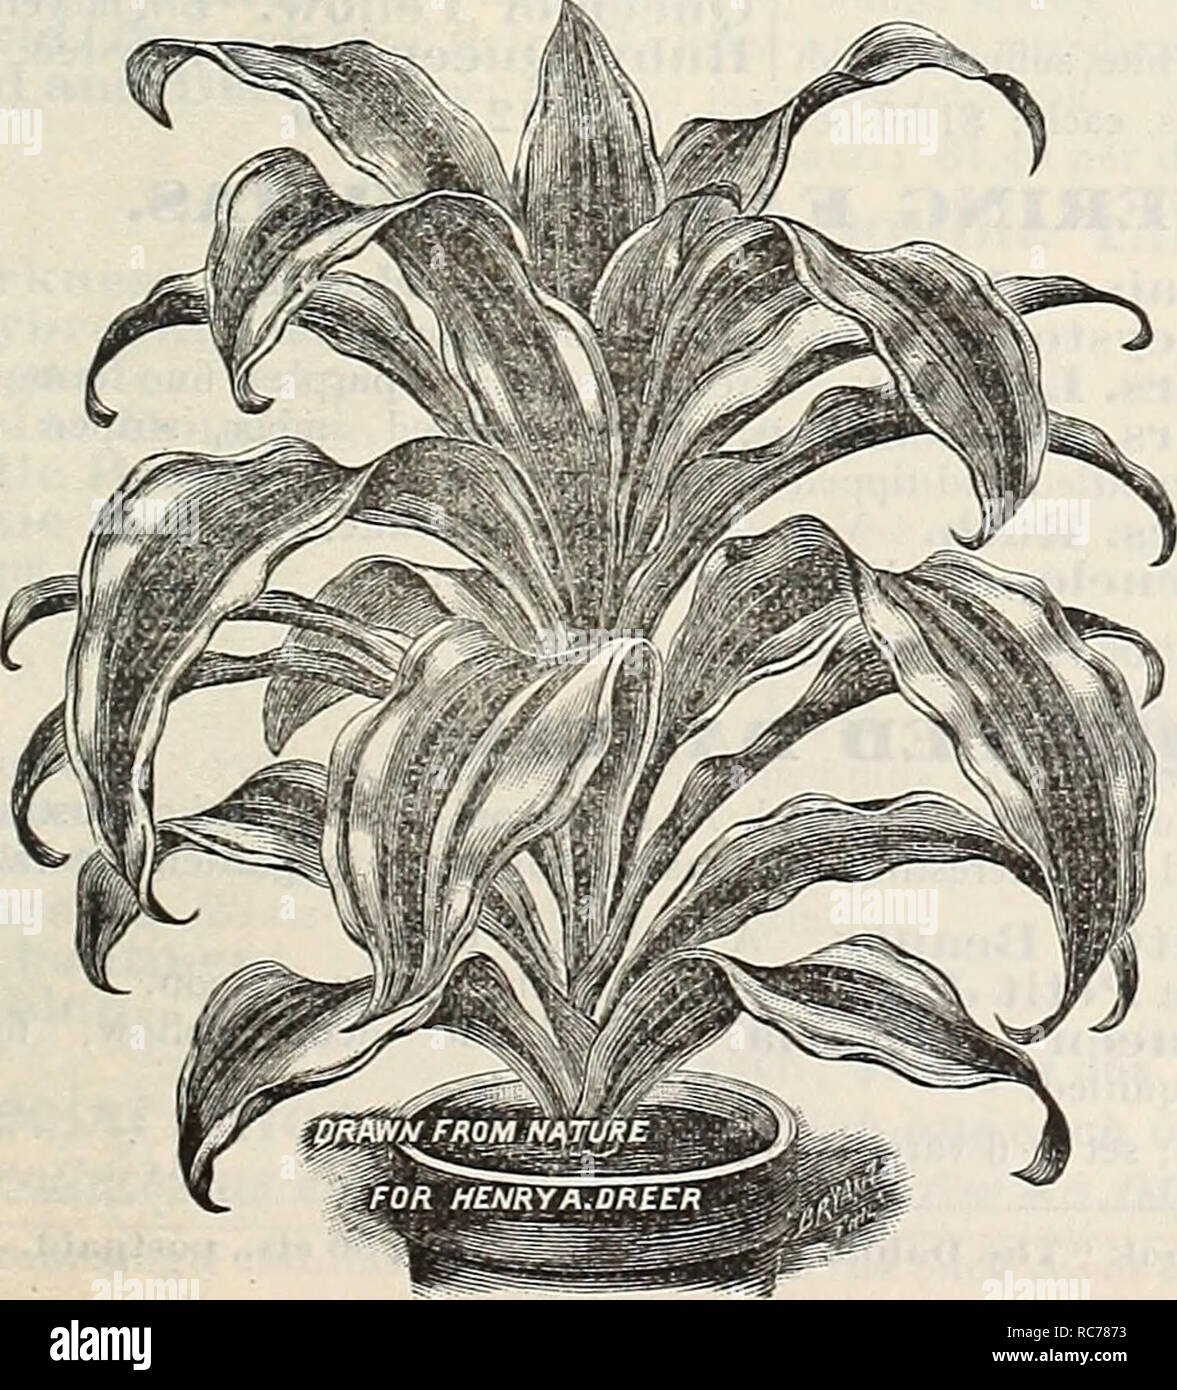 . Dreer's garden calendar : 1900. Seeds Catalogs; Nursery stock Catalogs; Gardening Equipment and supplies Catalogs; Flowers Seeds Catalogs; Vegetables Seeds Catalogs; Fruit Seeds Catalogs. CVCAS Revoluta, Sago Palm.. CYPERUS. ((ITmbrella Plant.) See page 111. DRACAENAS. A niabilis. A strong growing variety, prettily variegated green, white and pale violet tuining to rose. 50 cts. and §1.00 each. Briianti. A most useful var- iety, with heavy dark green foliage, making an excellent house plant, standing the dry atmosphere of living rooms. 30 cts. and 50 cts. each. FragrailS. A superb African sp Stock Photo